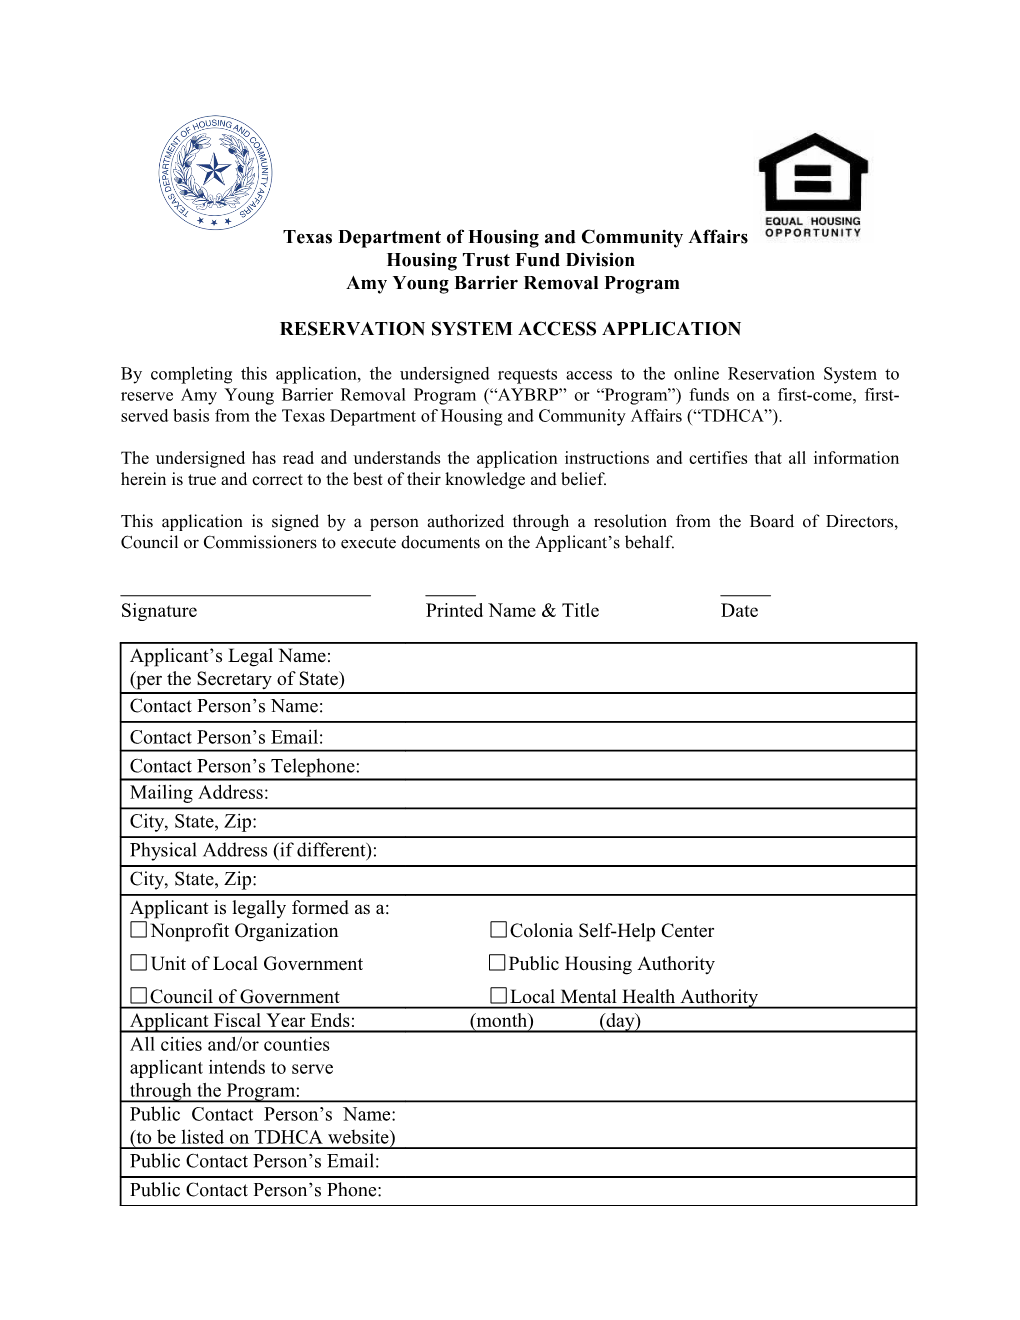 Housing Trust Fund Amy Young Barrier Removal Program Application to Access the Reservation